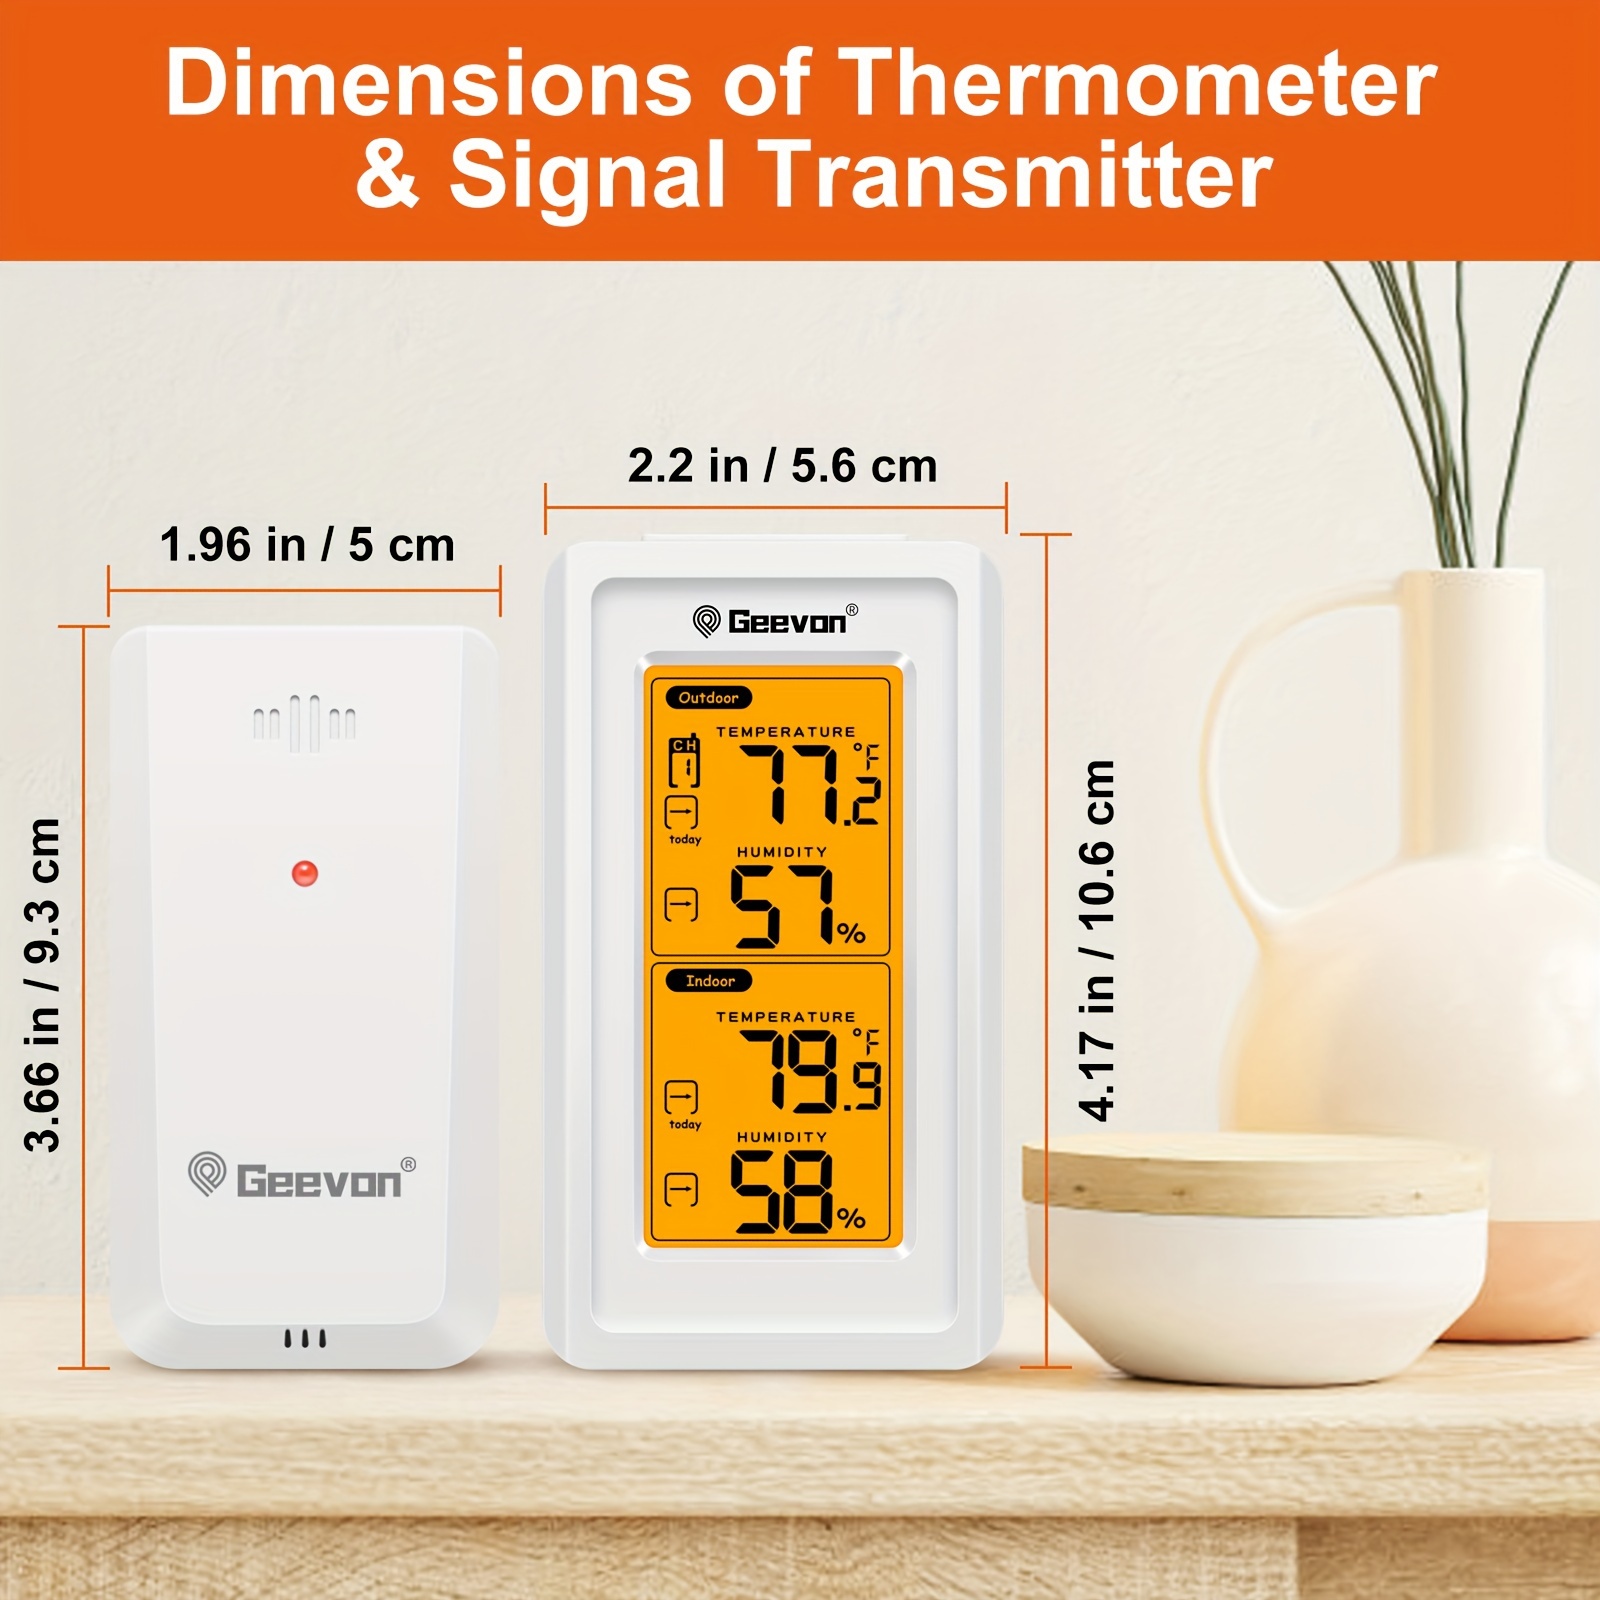 Geevon Indoor Outdoor Thermometer Wireless with 3 Remote Sensors, Digital Thermometer Hygrometer Room with Time,10 Seconds Backlight,200ft/60M Range